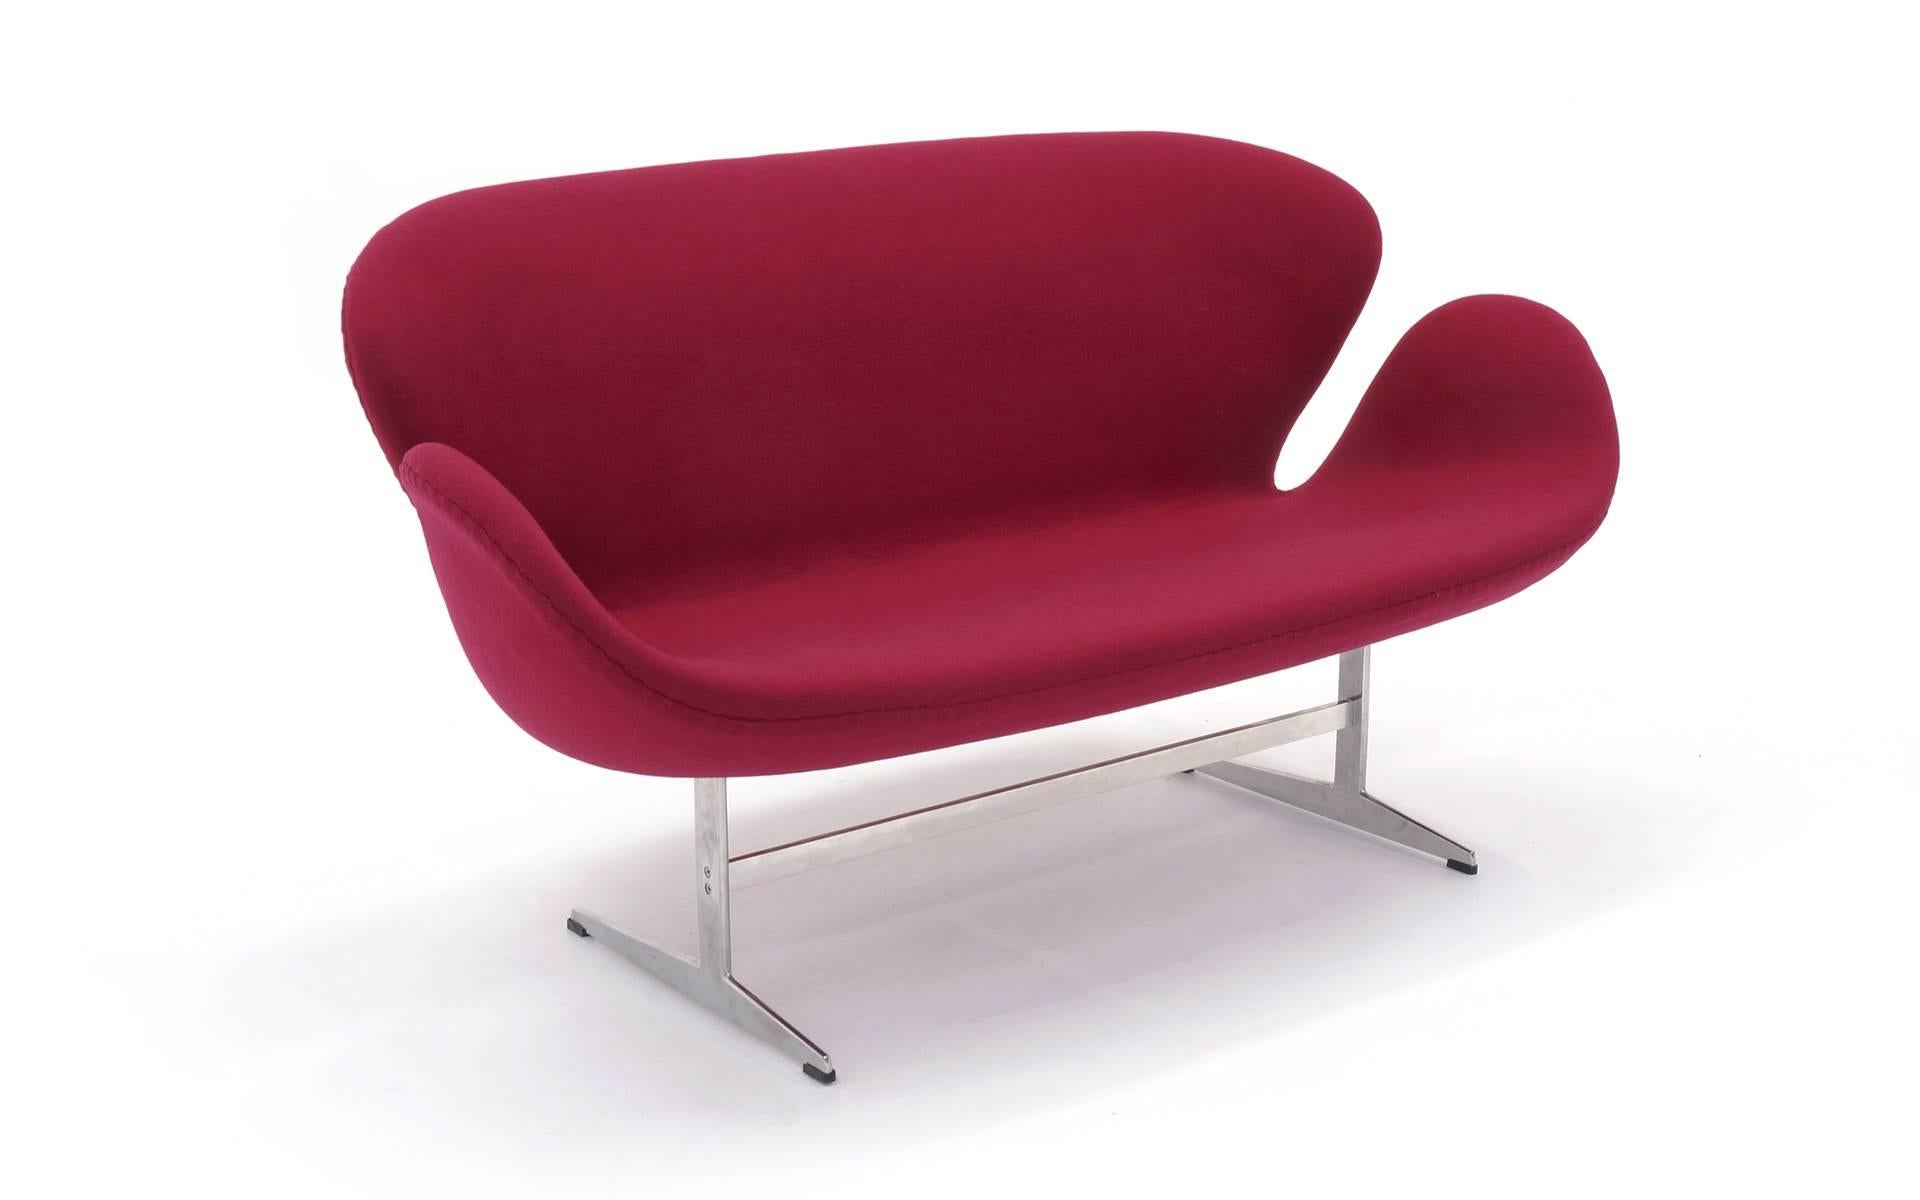 Original magenta upholstery on this beautiful swan sofa loveseat designed by Arne Jacobsen and manufactured by Fritz Hansen, Denmark, circa 1960s.

